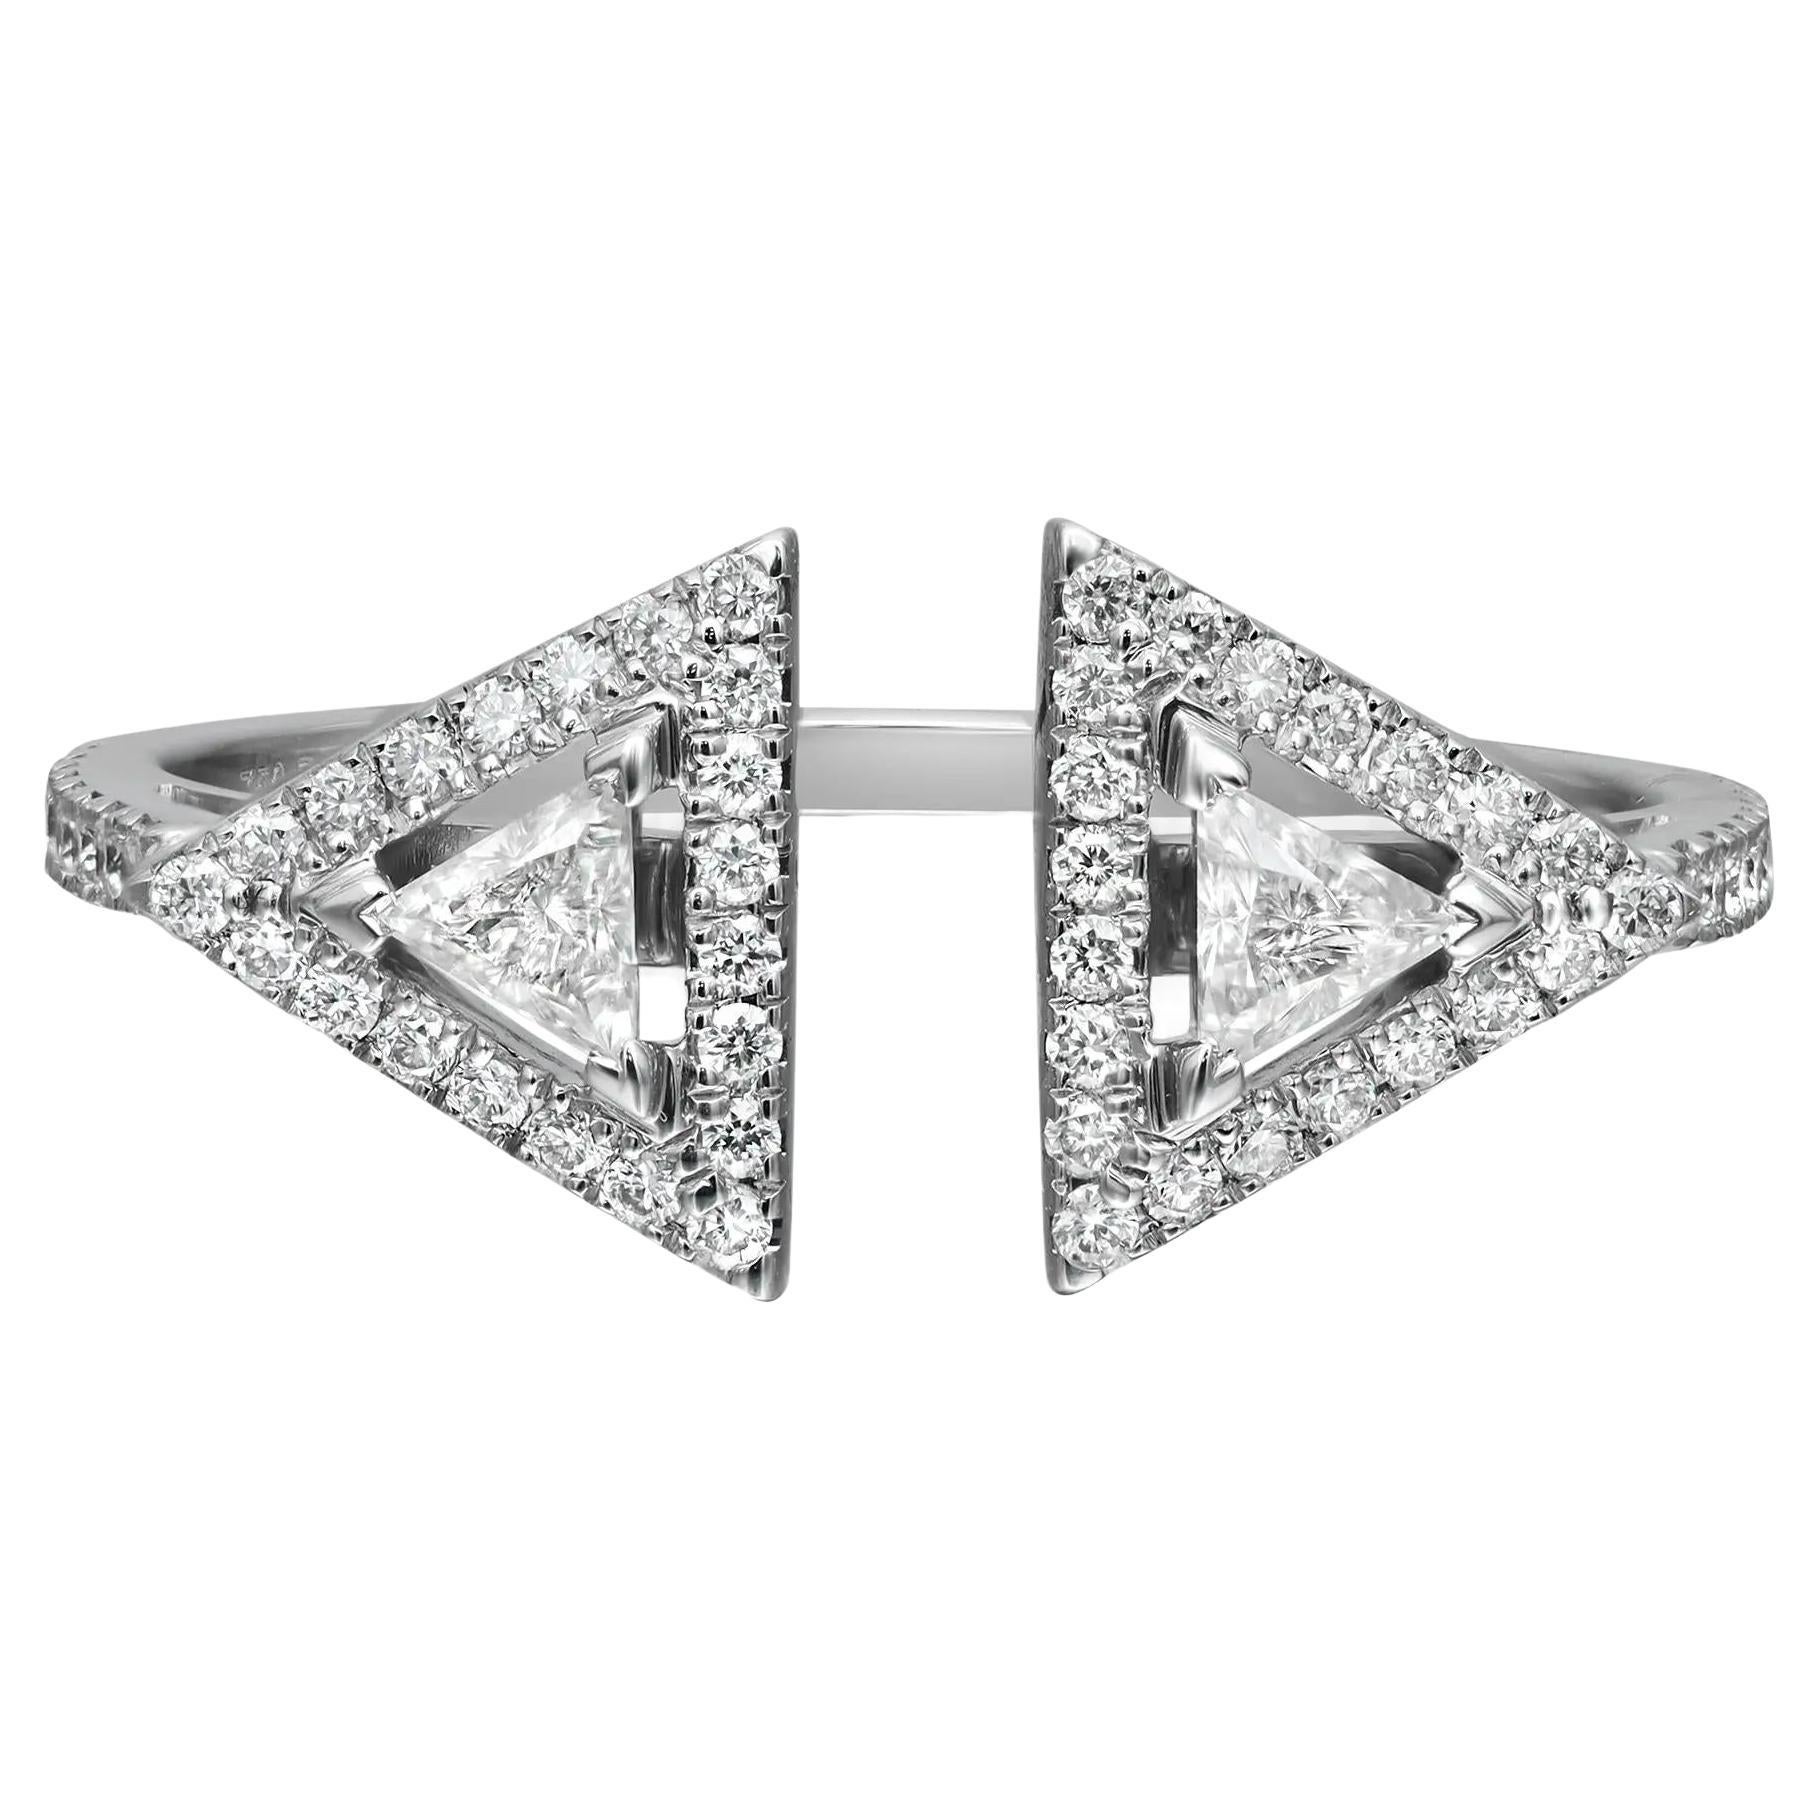 Messika 0.34Cttw Thea Diamond Ring 18K White Gold Size 52 US 6.25 For Sale